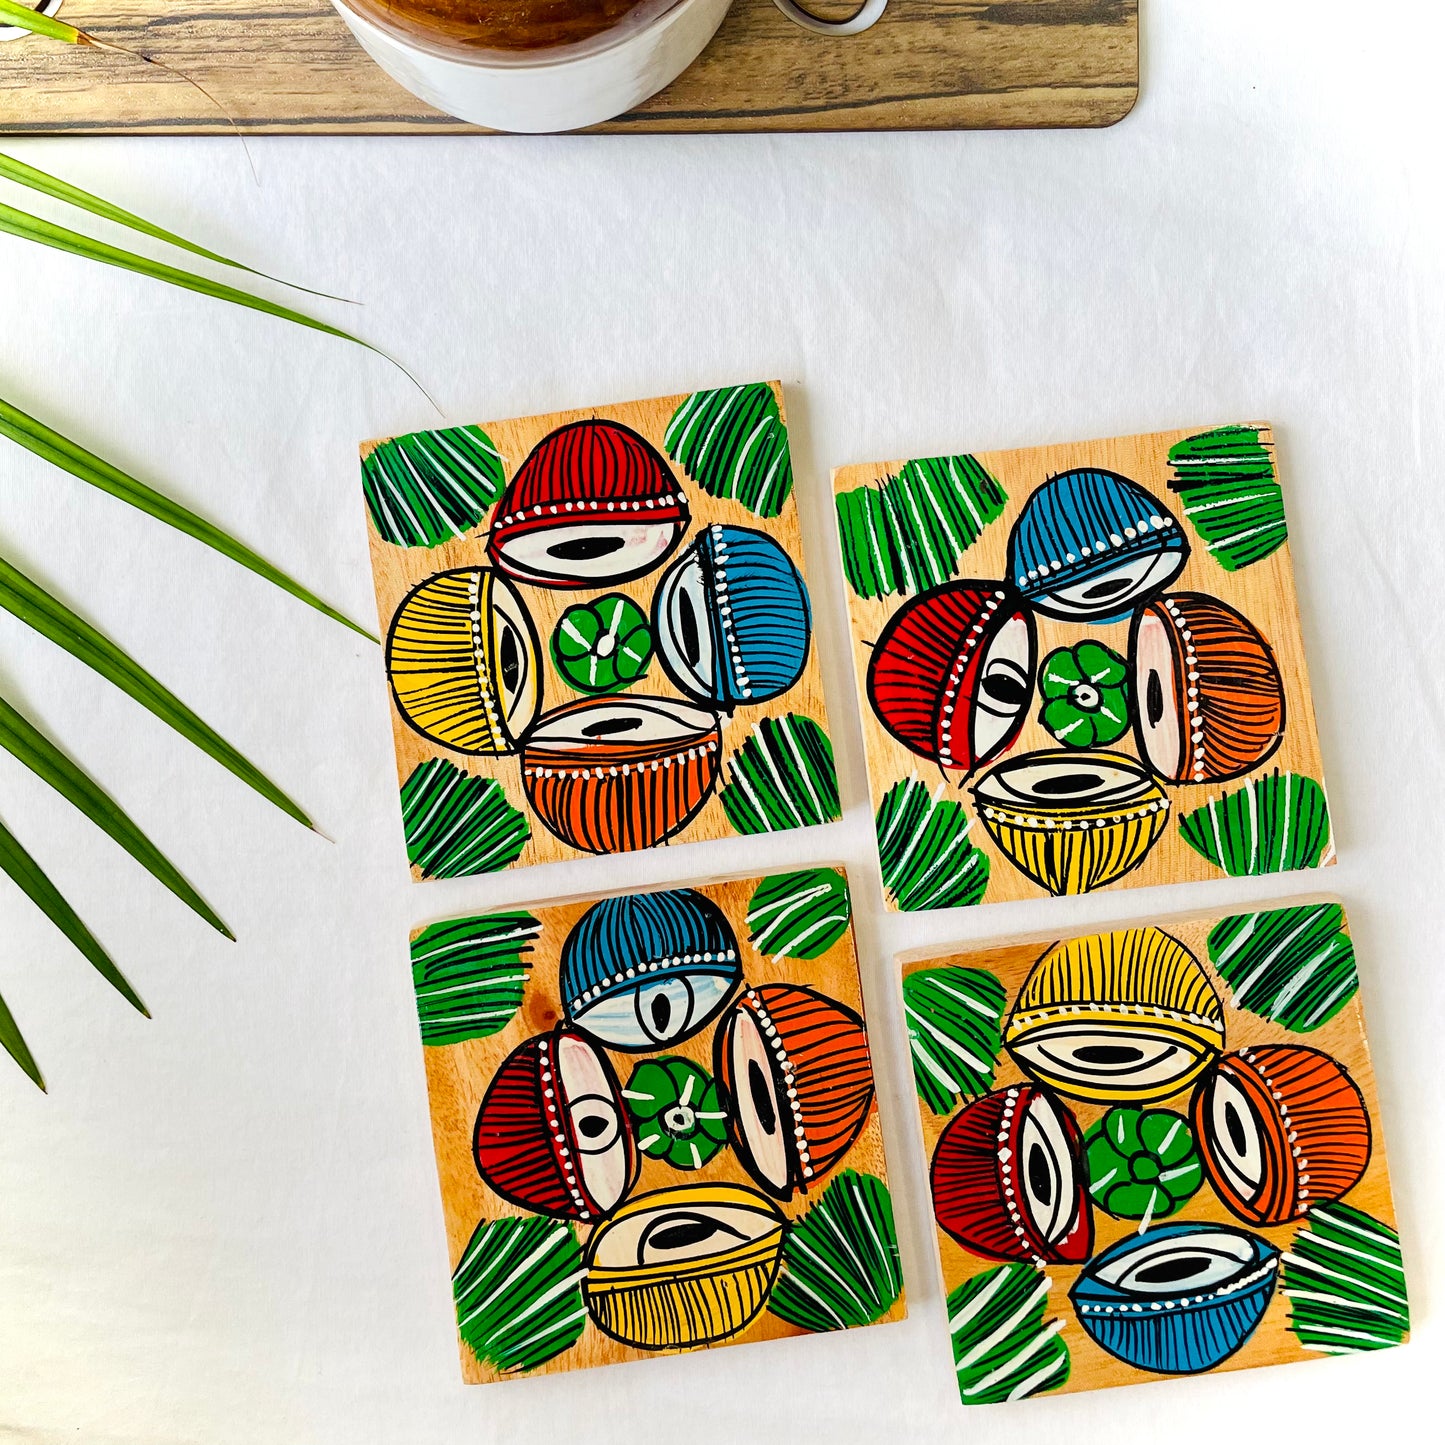 Alokya - 100% natural, Pattachitra painted terracotta coasters  - Square coasters: Tabla painted on the surface. Set of four.